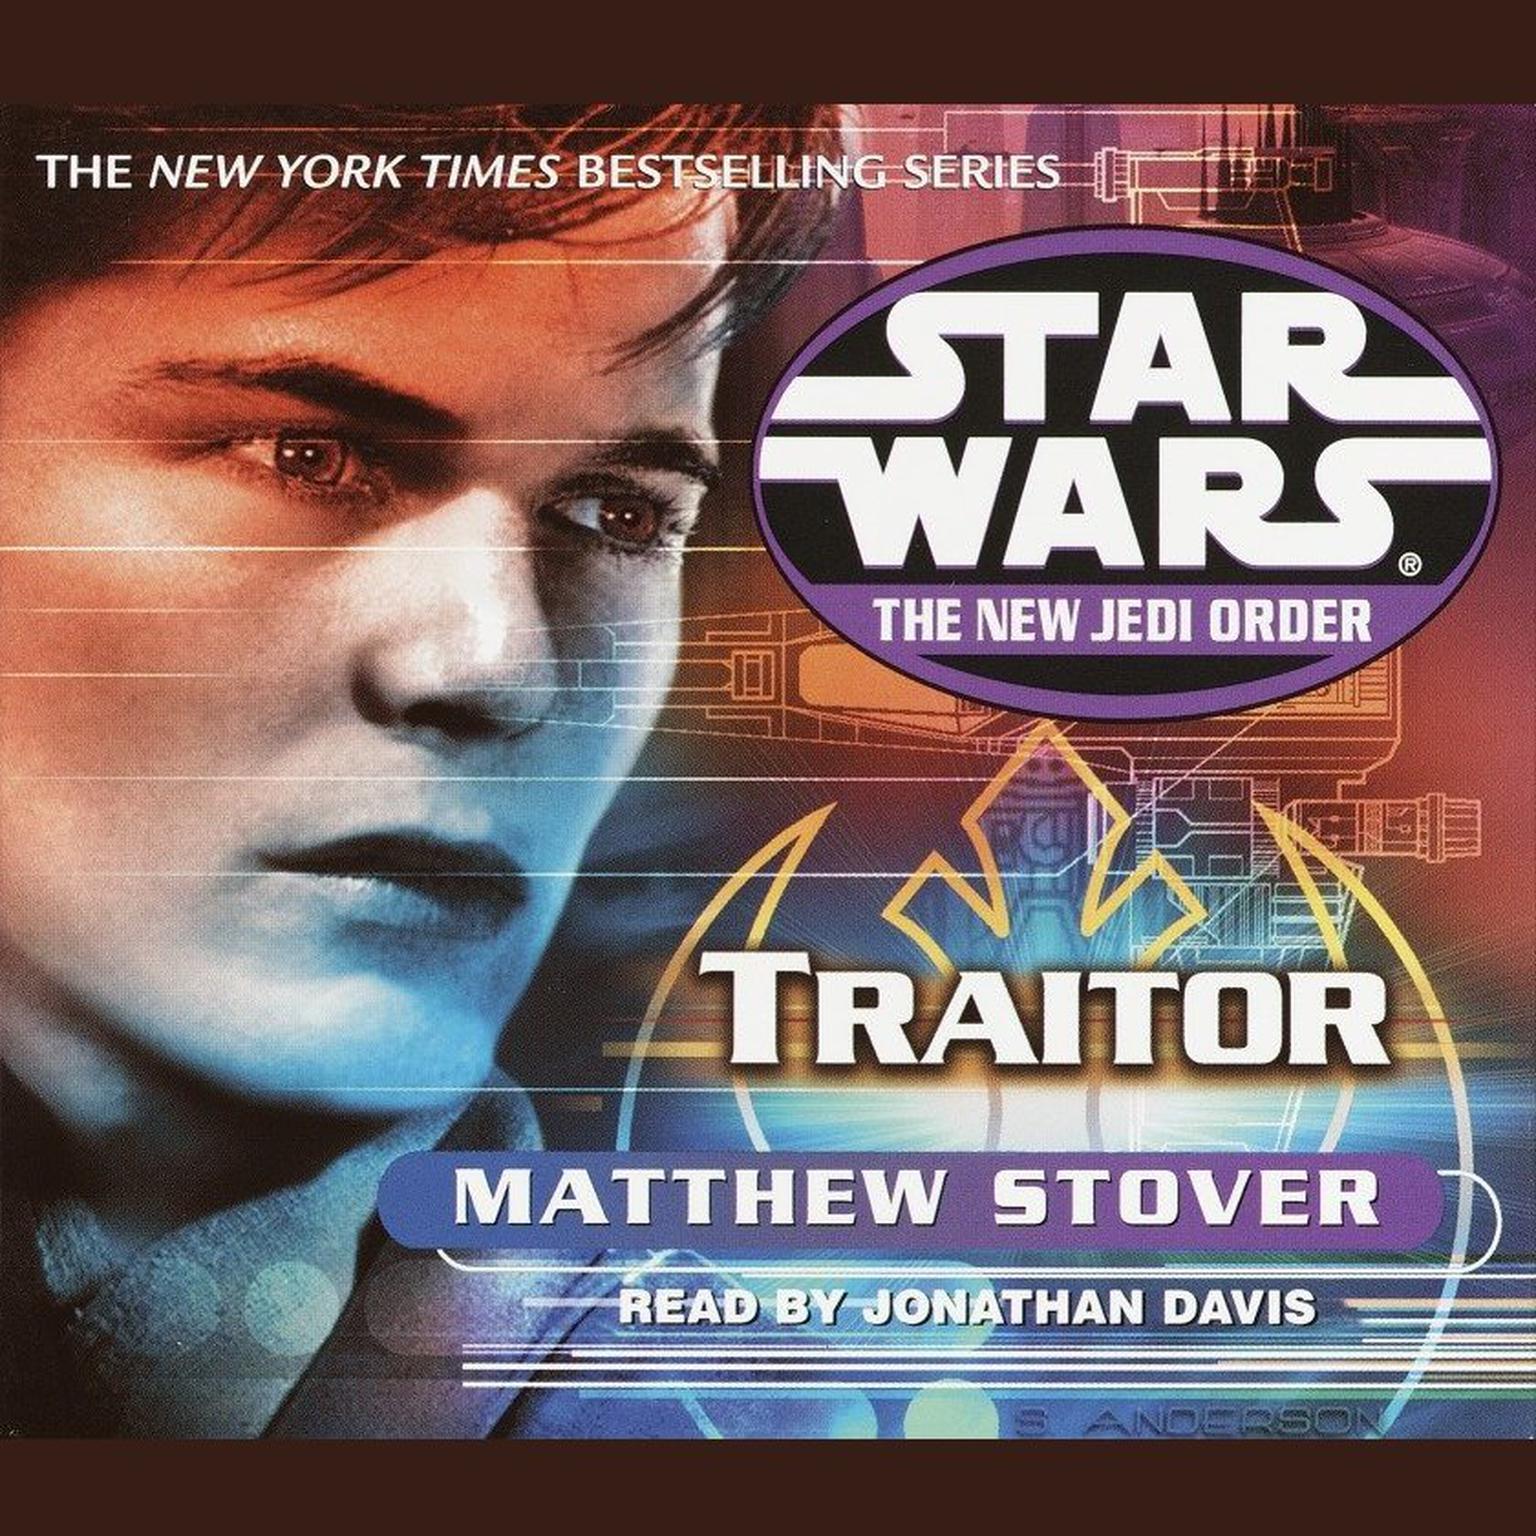 Star Wars: The New Jedi Order: Traitor (Abridged): Book 13 Audiobook, by Matthew Stover